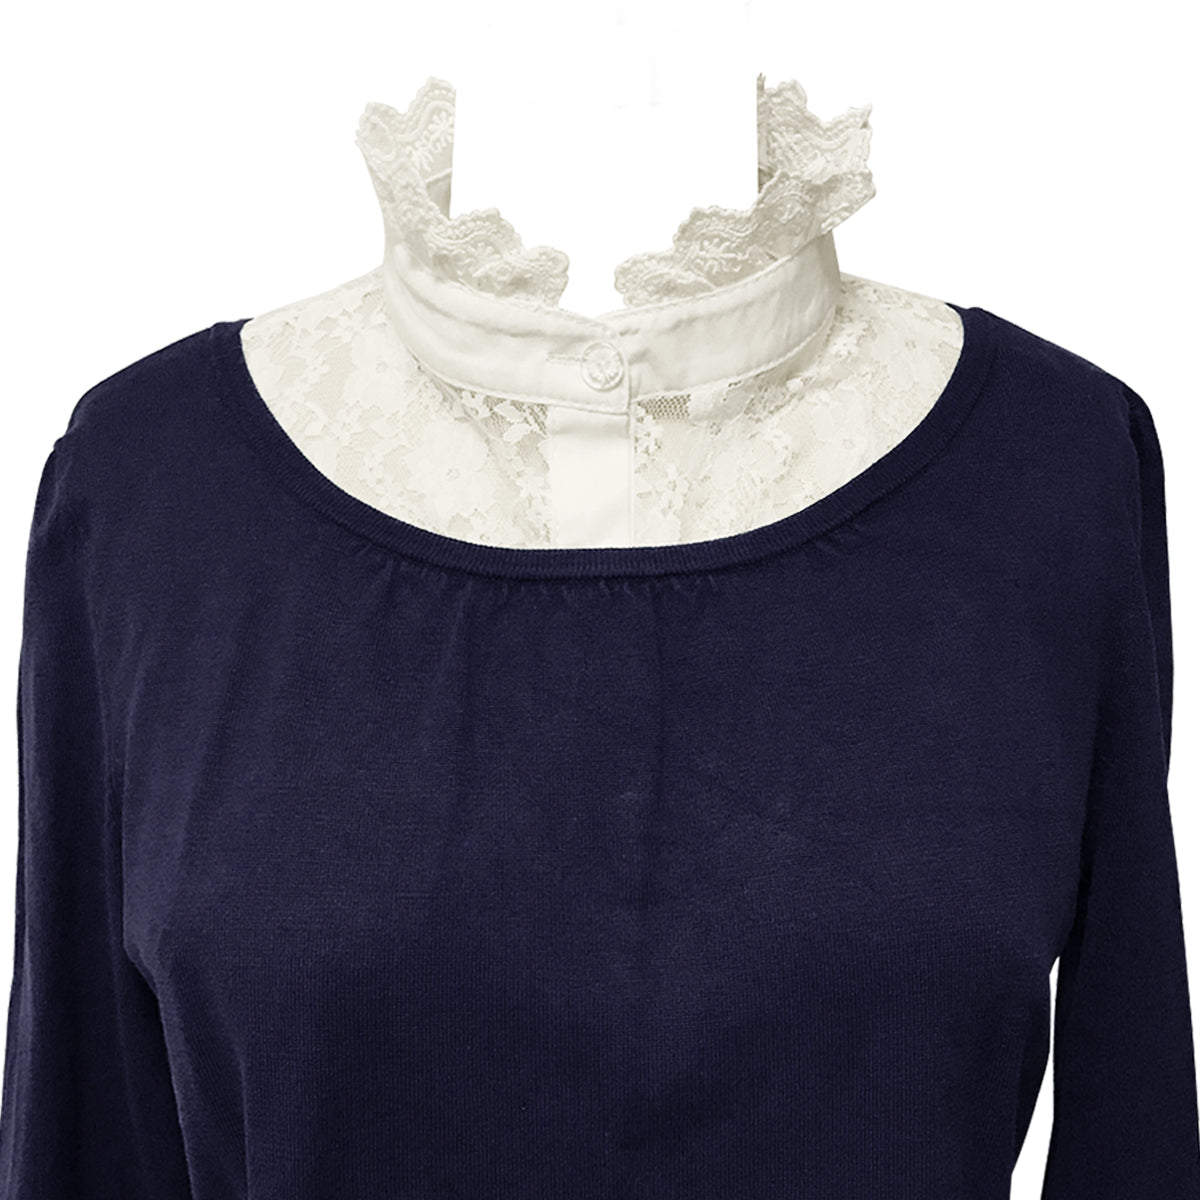 Wrapables Vintage Floral Lace Fake Collar Half Shirt